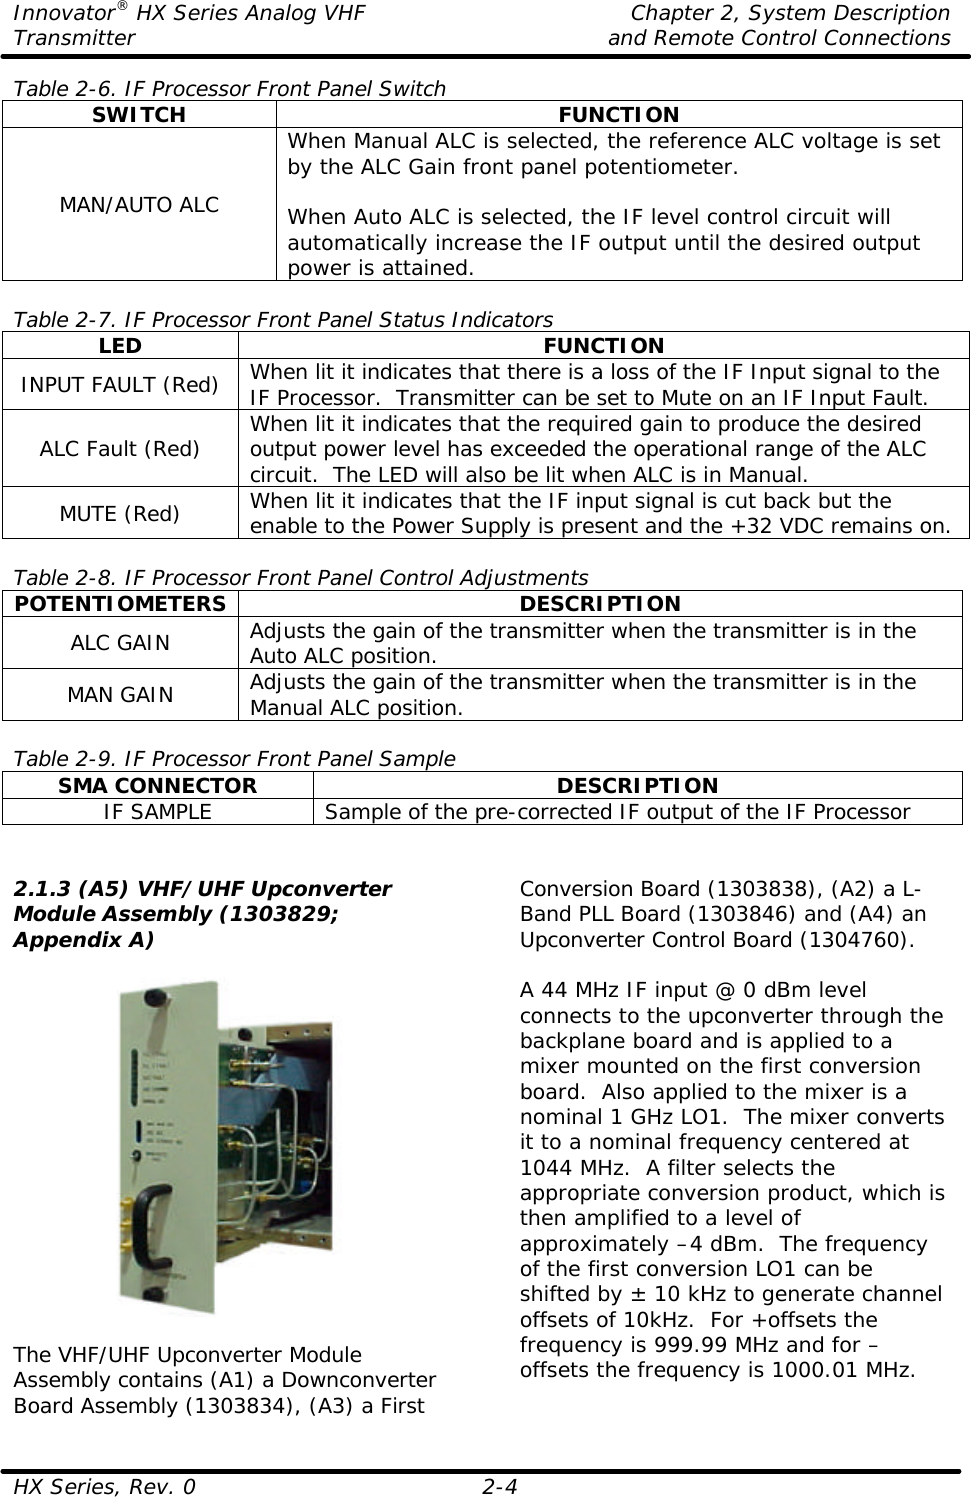 Innovator® HX Series Analog VHF    Chapter 2, System Description Transmitter    and Remote Control Connections  HX Series, Rev. 0 2-4 Table 2-6. IF Processor Front Panel Switch SWITCH FUNCTION MAN/AUTO ALC When Manual ALC is selected, the reference ALC voltage is set by the ALC Gain front panel potentiometer.   When Auto ALC is selected, the IF level control circuit will automatically increase the IF output until the desired output power is attained.  Table 2-7. IF Processor Front Panel Status Indicators LED FUNCTION INPUT FAULT (Red) When lit it indicates that there is a loss of the IF Input signal to the IF Processor.  Transmitter can be set to Mute on an IF Input Fault. ALC Fault (Red) When lit it indicates that the required gain to produce the desired output power level has exceeded the operational range of the ALC circuit.  The LED will also be lit when ALC is in Manual. MUTE (Red) When lit it indicates that the IF input signal is cut back but the enable to the Power Supply is present and the +32 VDC remains on.  Table 2-8. IF Processor Front Panel Control Adjustments POTENTIOMETERS DESCRIPTION ALC GAIN Adjusts the gain of the transmitter when the transmitter is in the Auto ALC position. MAN GAIN Adjusts the gain of the transmitter when the transmitter is in the Manual ALC position.  Table 2-9. IF Processor Front Panel Sample SMA CONNECTOR DESCRIPTION IF SAMPLE Sample of the pre-corrected IF output of the IF Processor   2.1.3 (A5) VHF/UHF Upconverter Module Assembly (1303829; Appendix A)    The VHF/UHF Upconverter Module Assembly contains (A1) a Downconverter Board Assembly (1303834), (A3) a First Conversion Board (1303838), (A2) a L-Band PLL Board (1303846) and (A4) an Upconverter Control Board (1304760).  A 44 MHz IF input @ 0 dBm level connects to the upconverter through the backplane board and is applied to a mixer mounted on the first conversion board.  Also applied to the mixer is a nominal 1 GHz LO1.  The mixer converts it to a nominal frequency centered at 1044 MHz.  A filter selects the appropriate conversion product, which is then amplified to a level of approximately –4 dBm.  The frequency of the first conversion LO1 can be shifted by ± 10 kHz to generate channel offsets of 10kHz.  For +offsets the frequency is 999.99 MHz and for –offsets the frequency is 1000.01 MHz. 